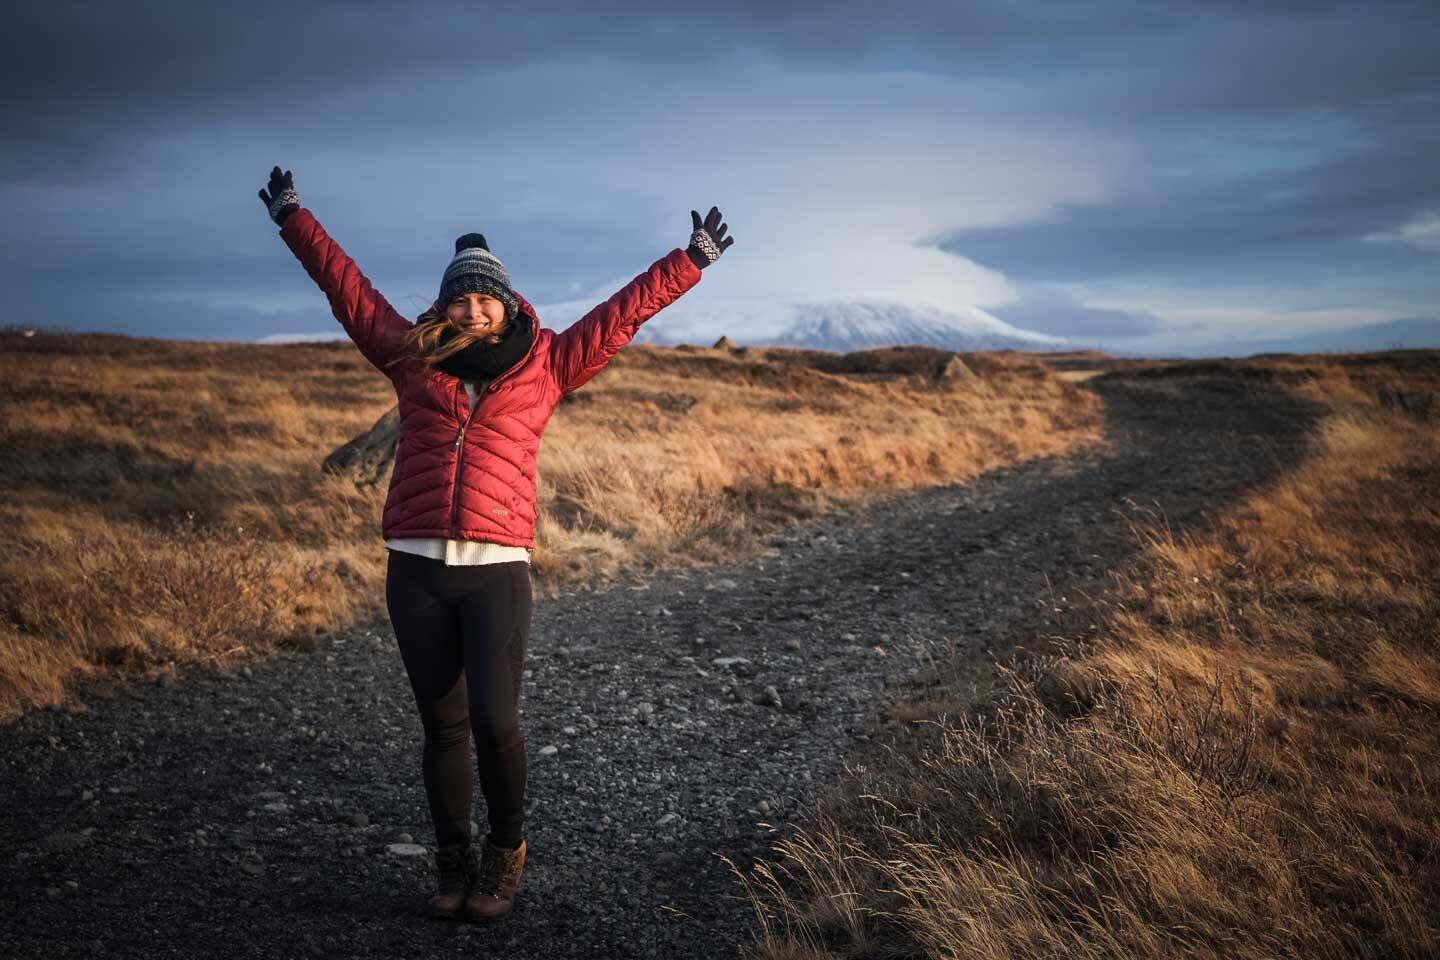 testing out different down jackets in Iceland